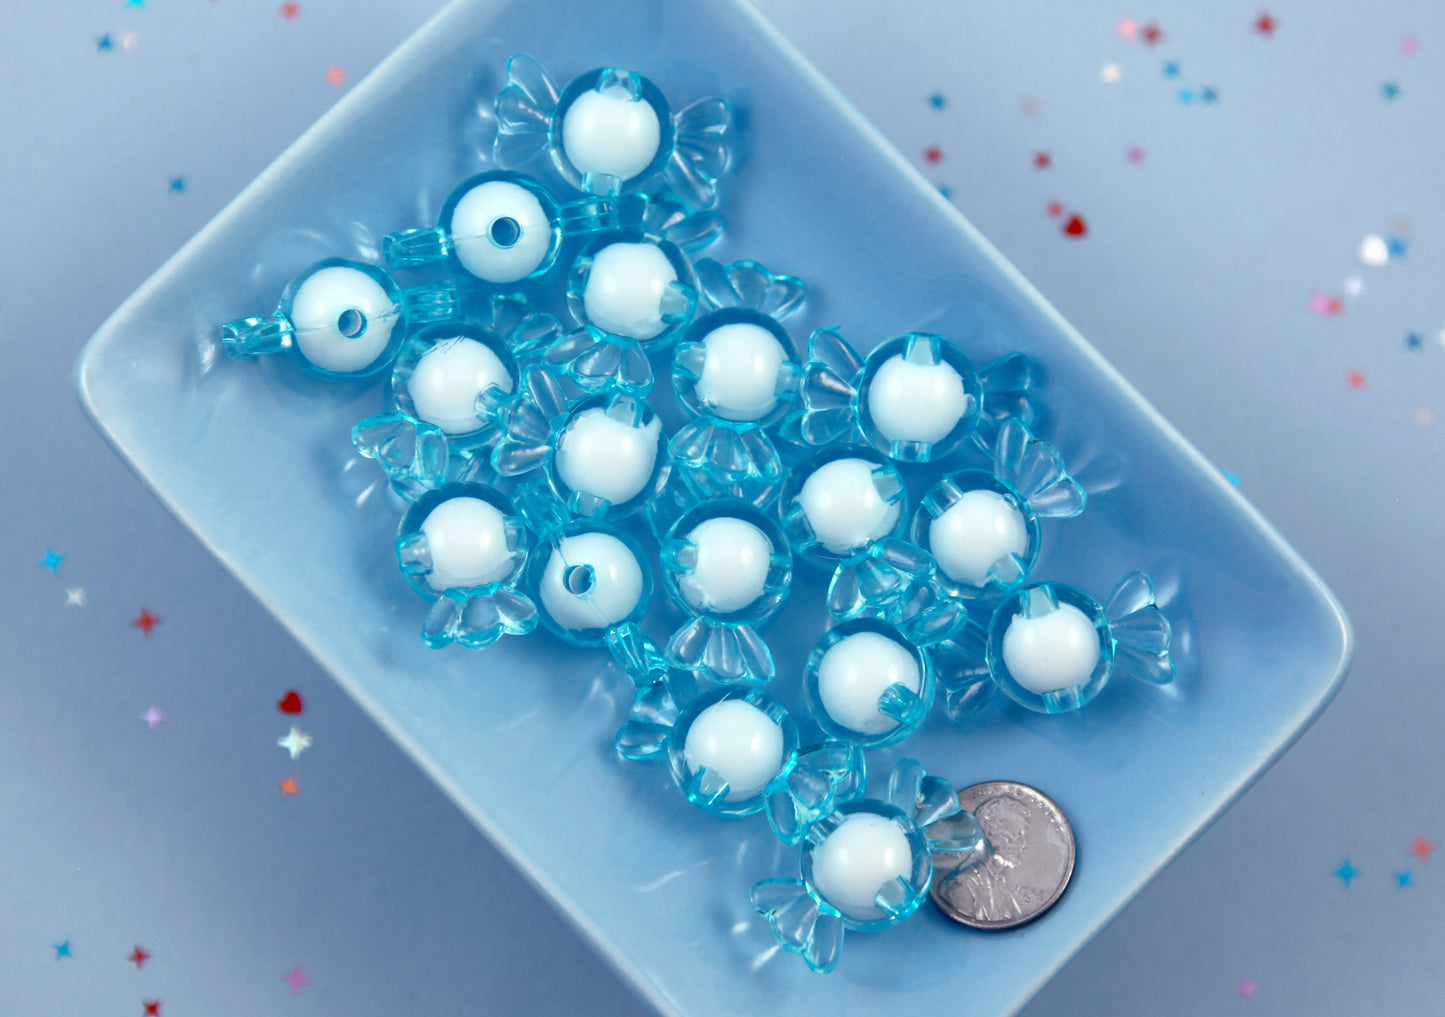 Candy Beads - Blue - 30mm Big Pastel Candies Wrapped Candy Shape Acrylic or Resin Beads - 20 pc set